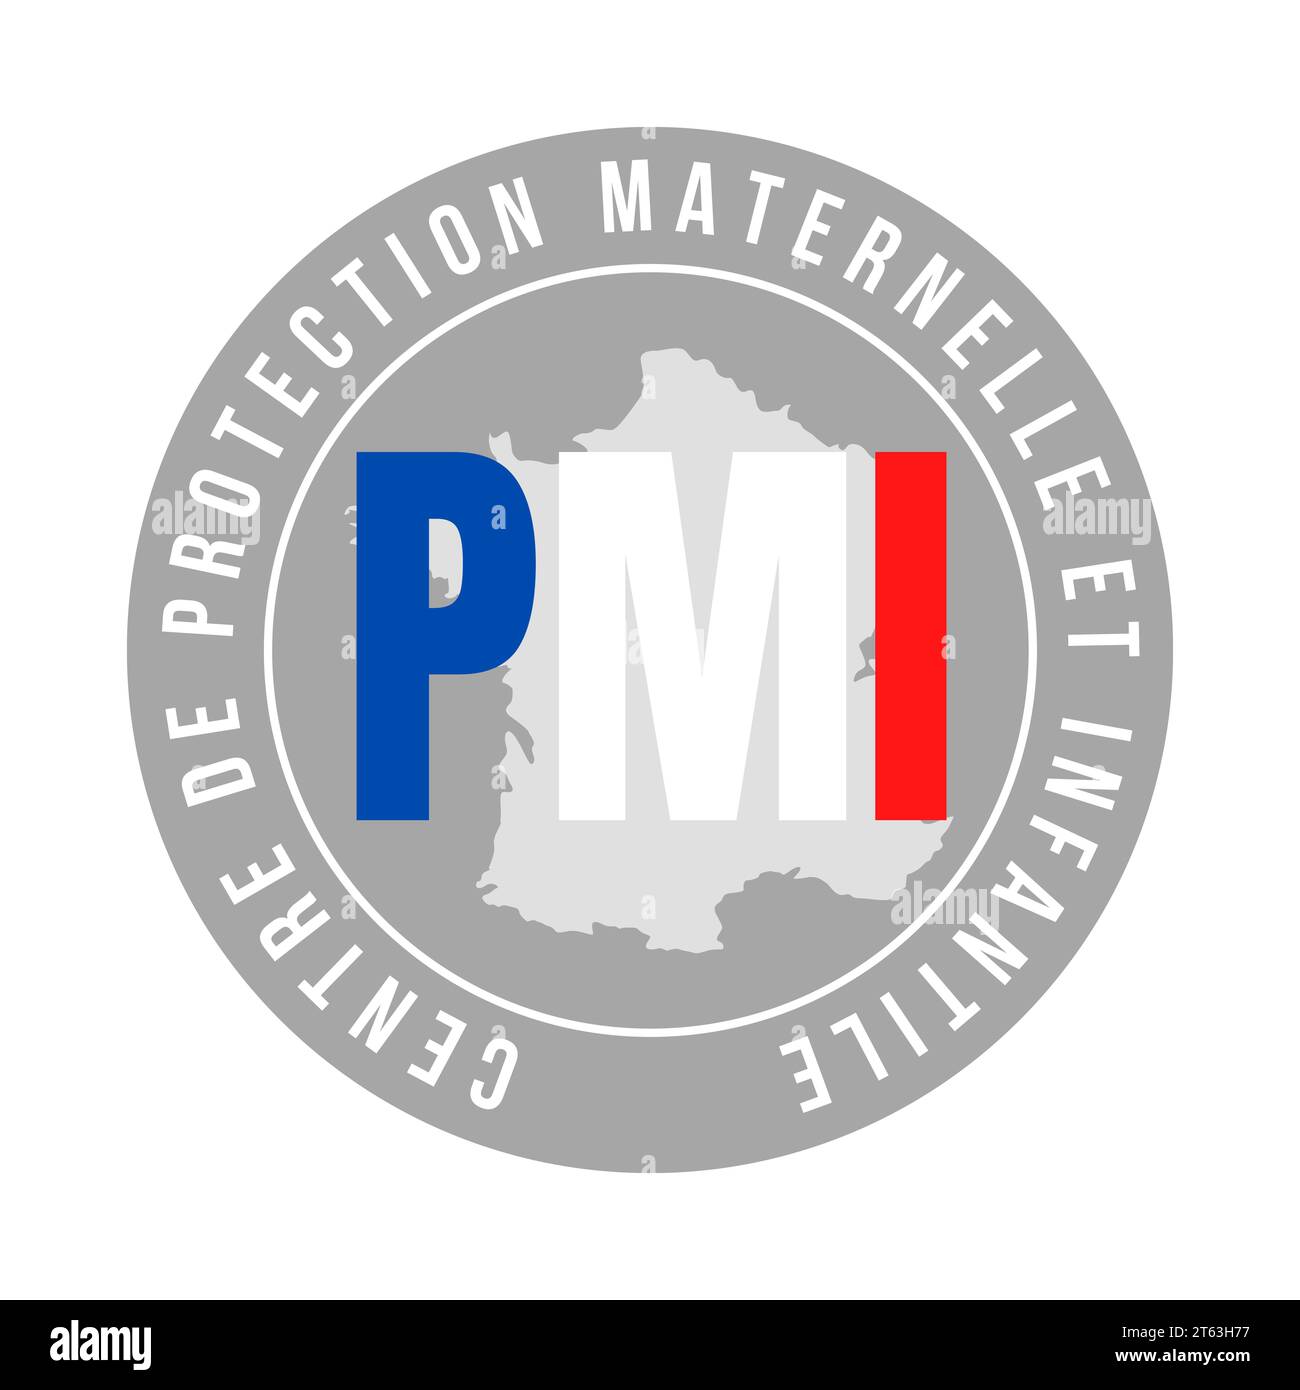 PMI maternal and child protection called protection maternelle et infantile in French language Stock Photo